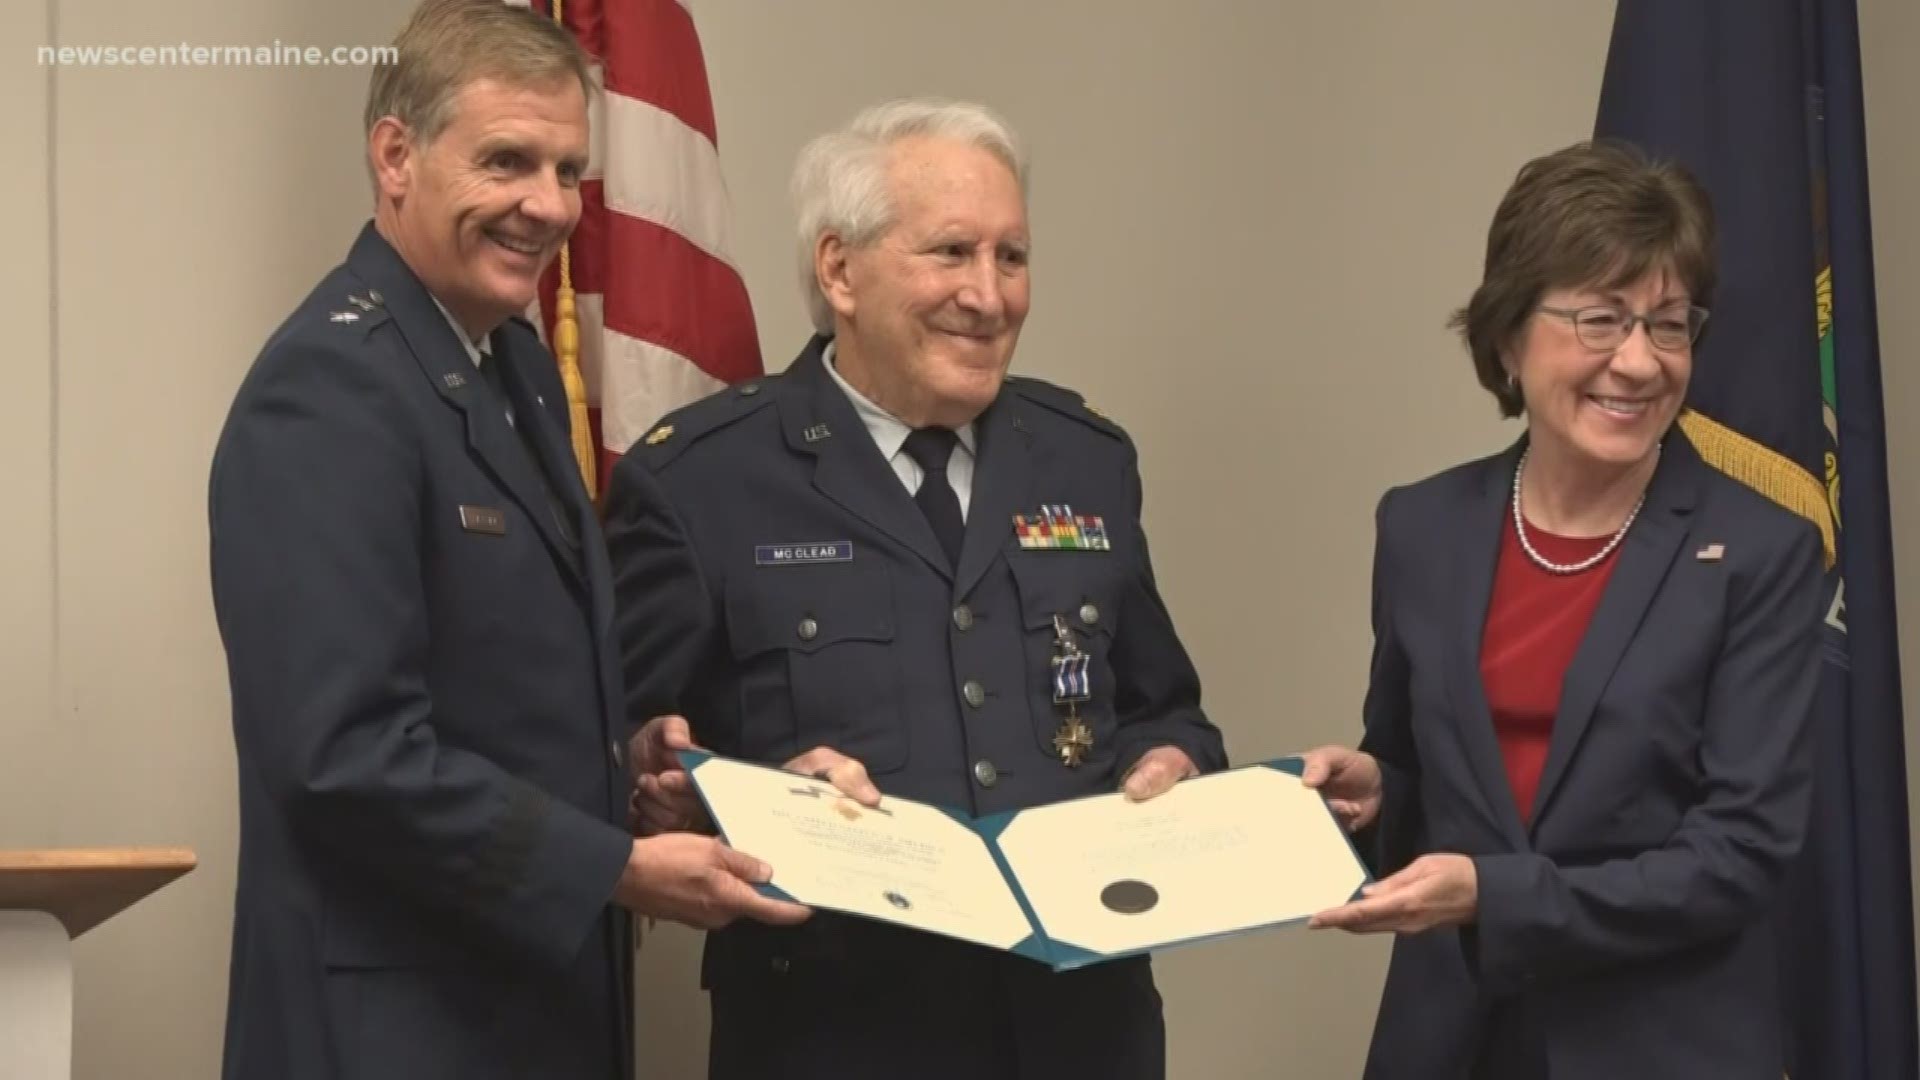 After fifty years -- one Vietnam veteran is being honored with the Distinguished Flying Cross Award.